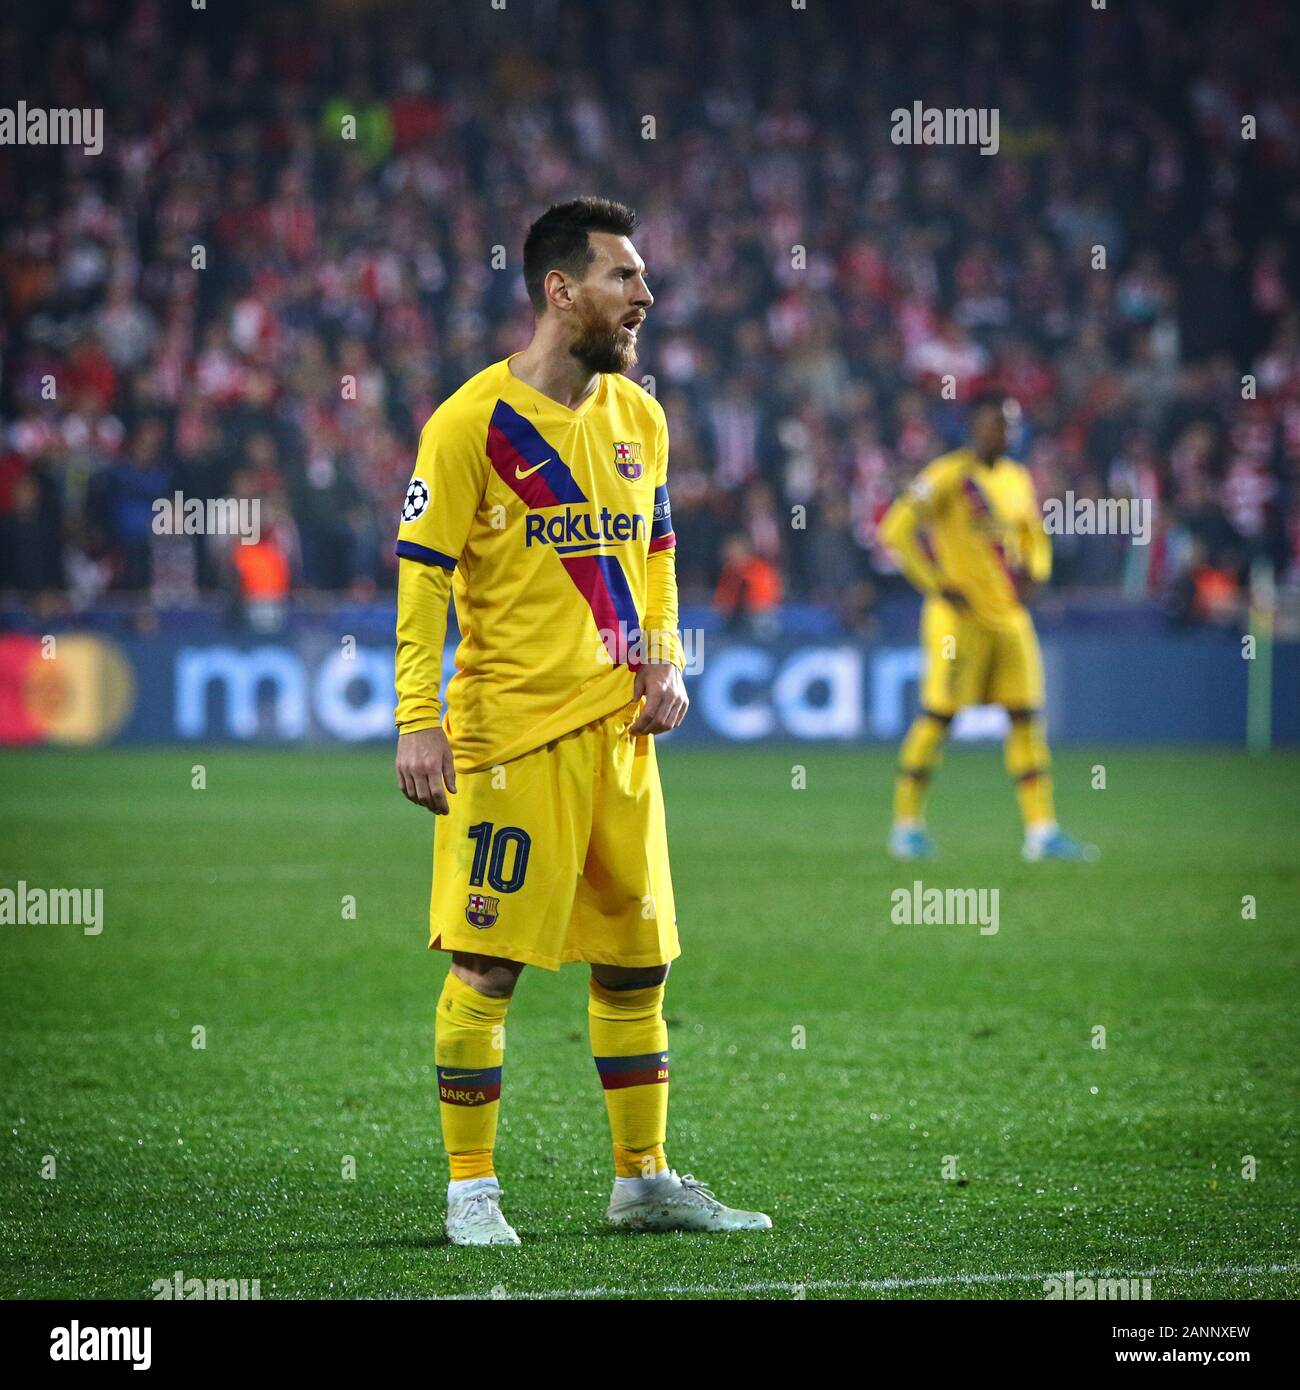 PRAGUE, CZECHIA - OCTOBER 23, 2019: Lionel Messi of Barcelona in action during the UEFA Champions League game against Slavia Praha at Eden Arena in Prague, Czech Republic. Barcelona won 2-1 Stock Photo